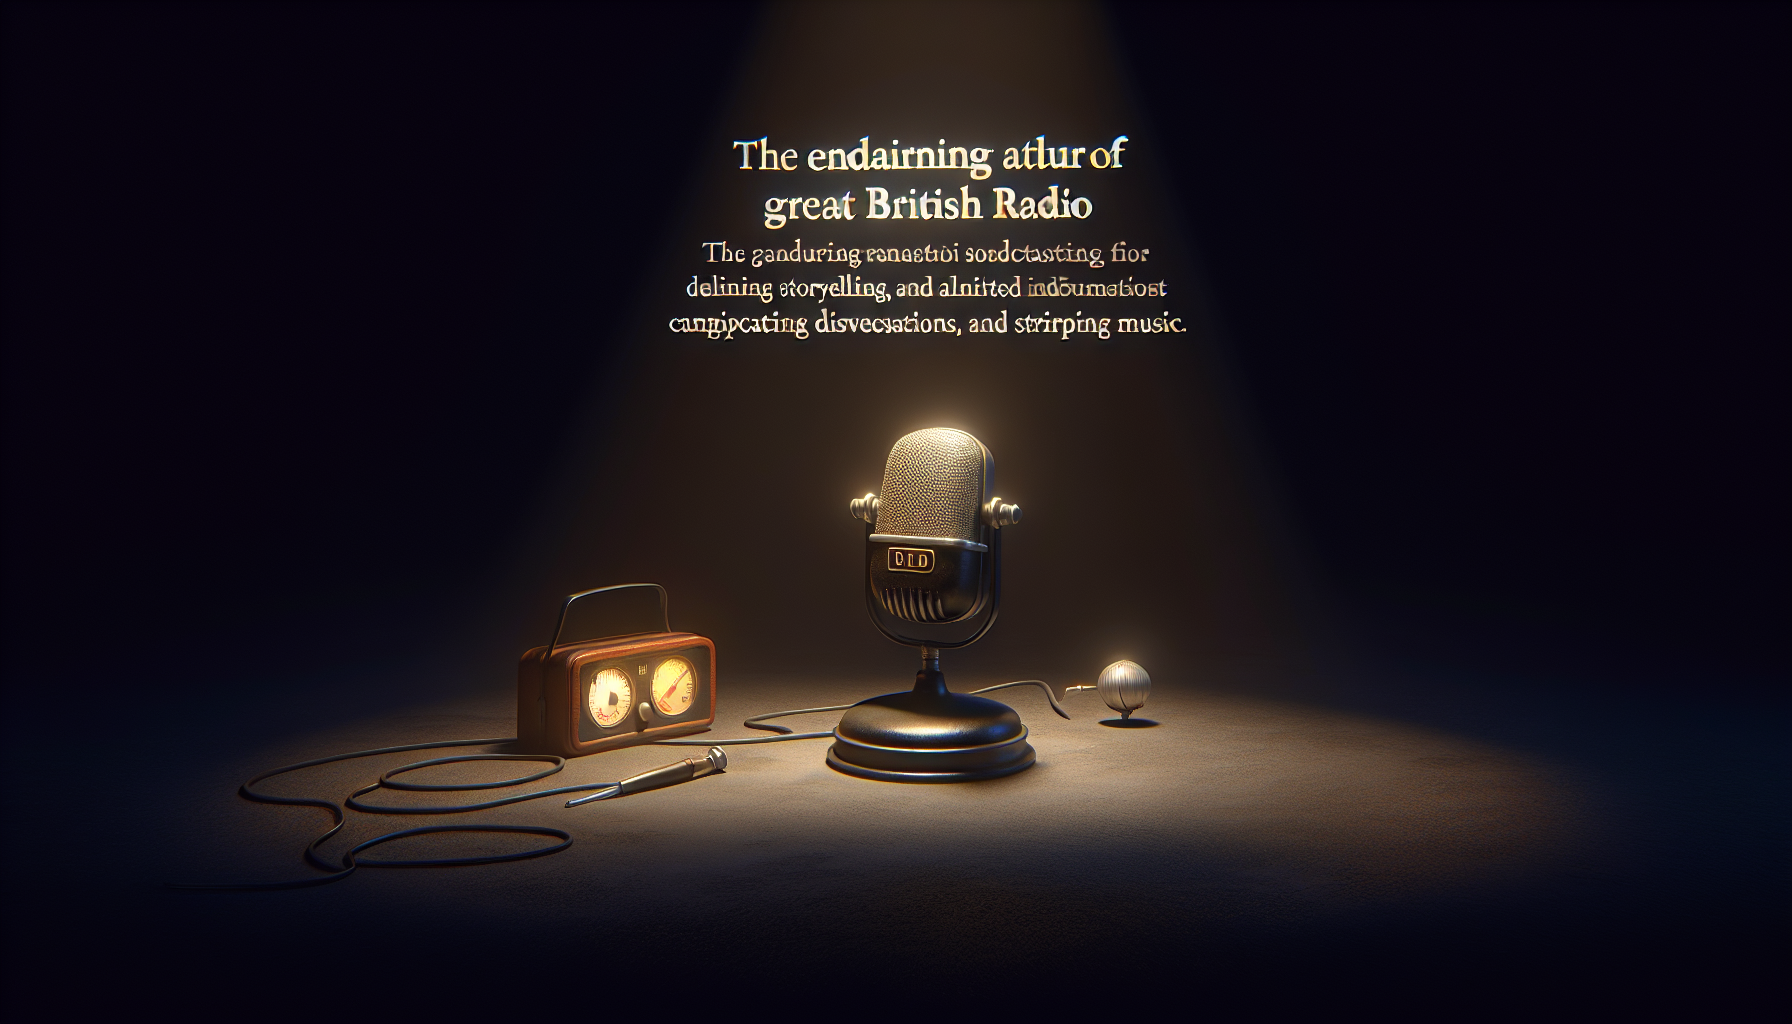 great british radio ceases broadcasting and trading 4